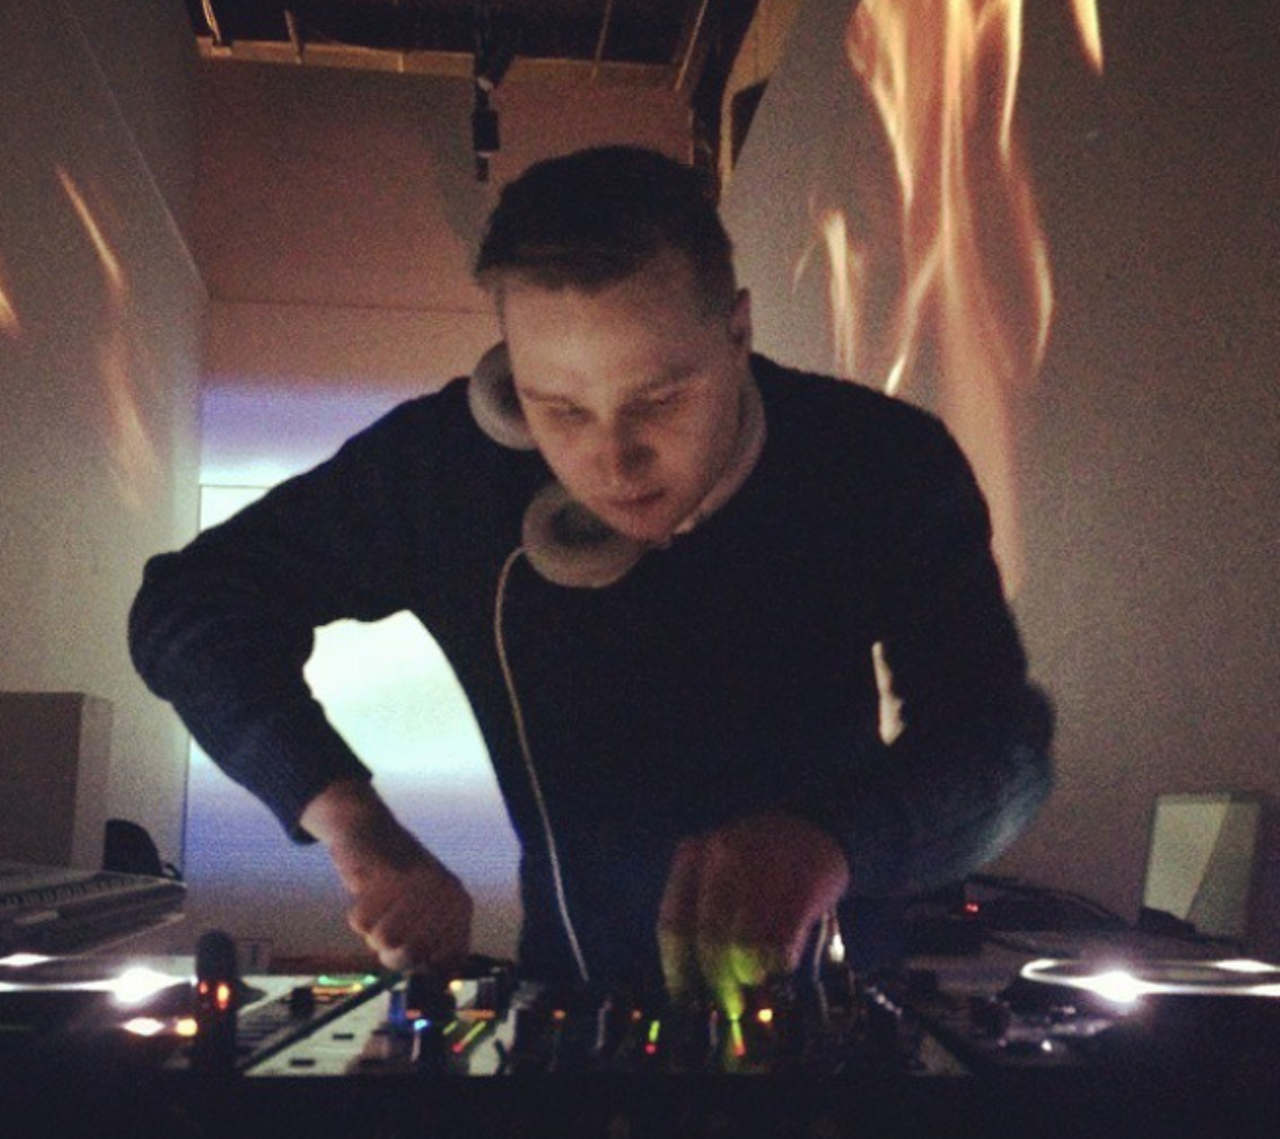 Creepside
Friday, March 16, 8:45-9:30pm
Electronic artist and producer, Creepside’s music combines everything from current EDM and vogue elements matched with ’90s UK garage.
Photo via Instagram / creepsidebb